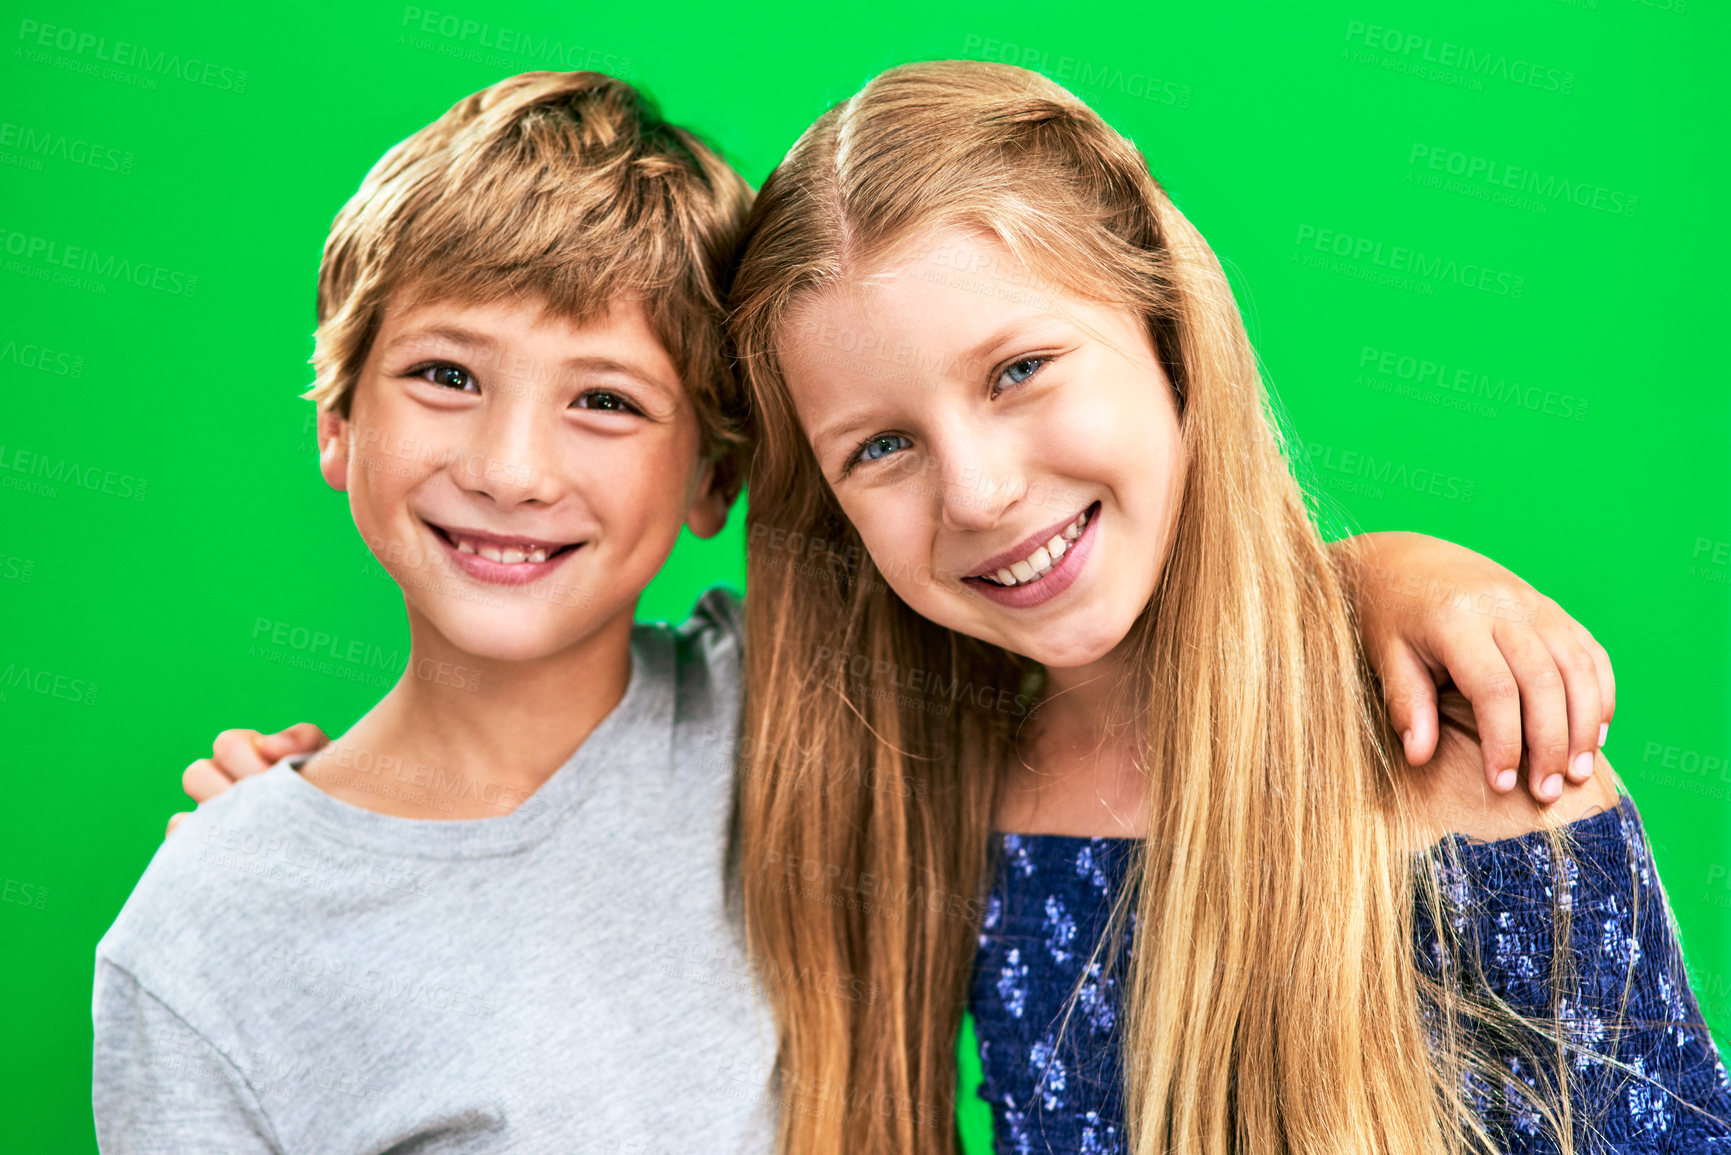 Buy stock photo Studio portrait of two adorable young children standing against a green background